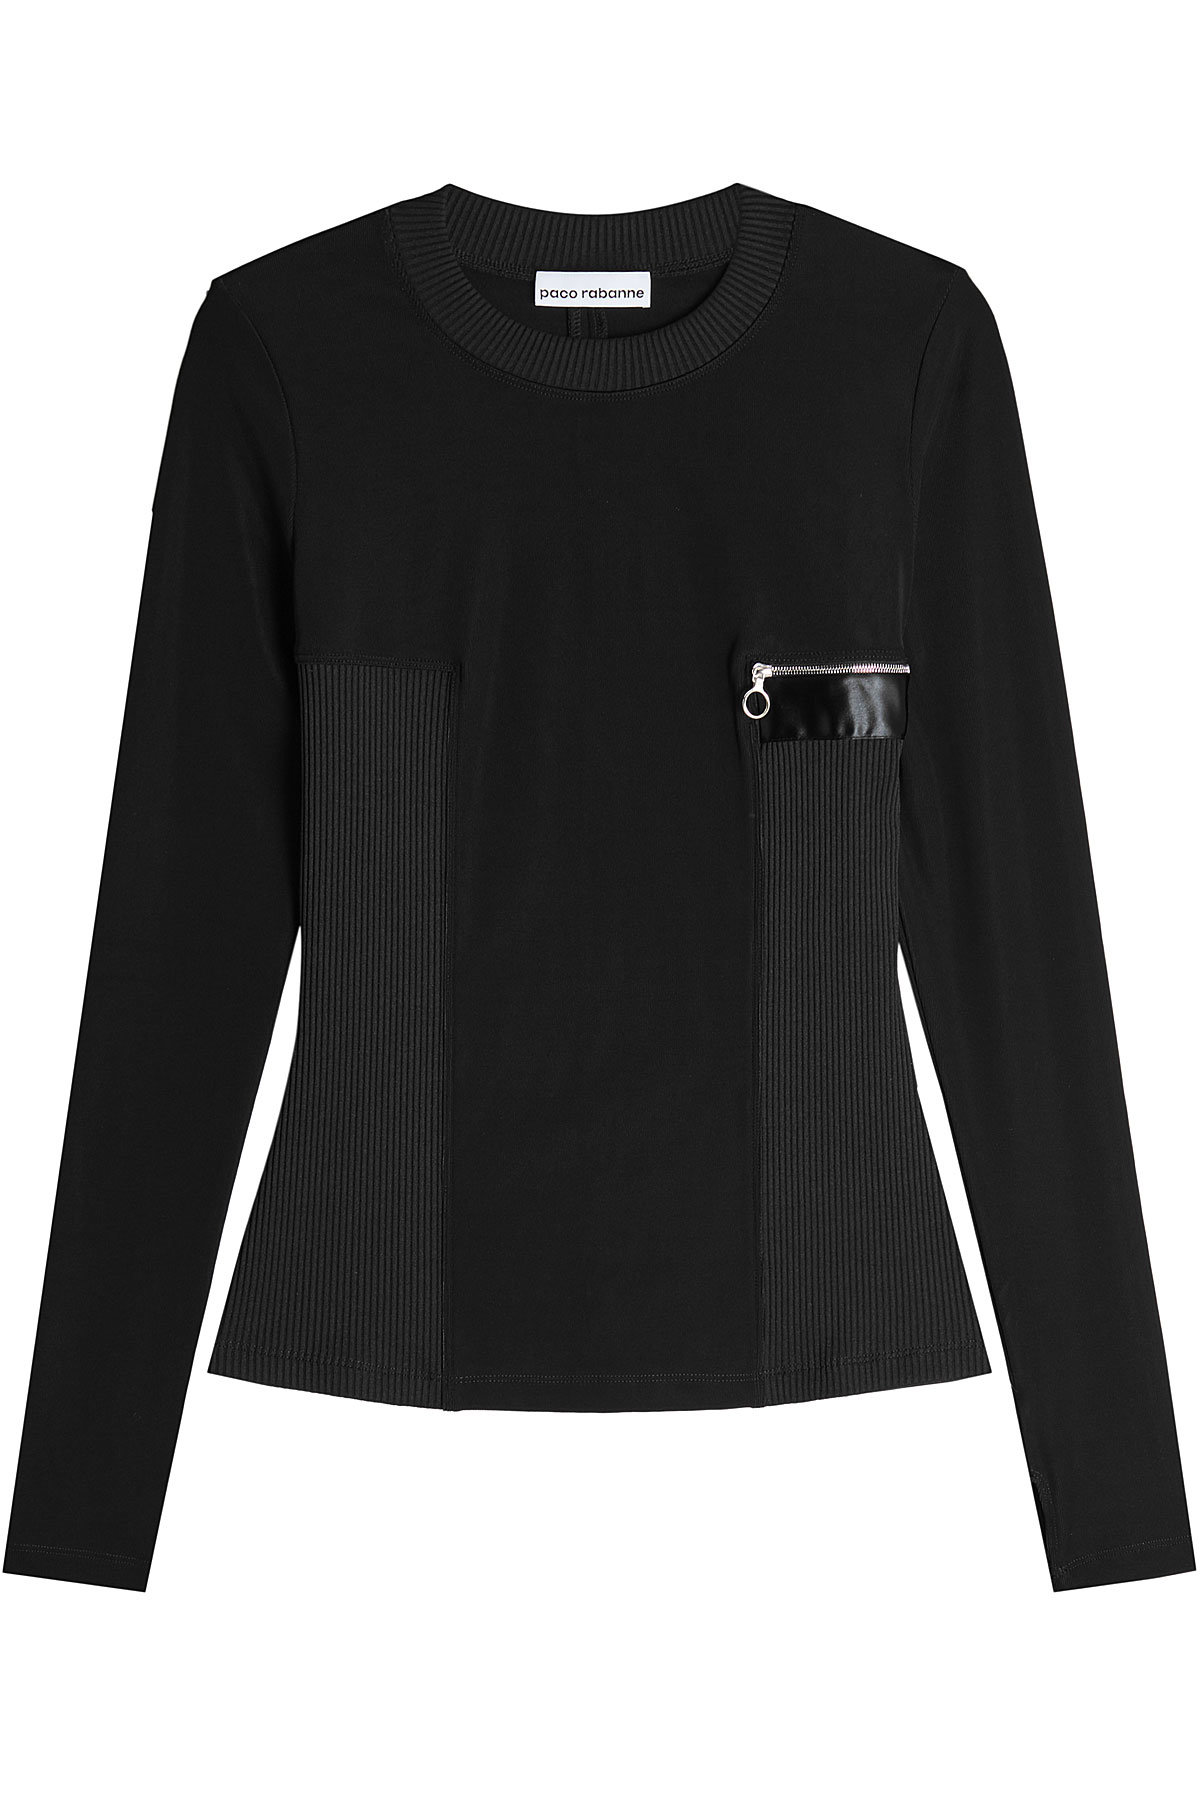 Knit Pullover with Zipped Pocket by Paco Rabanne